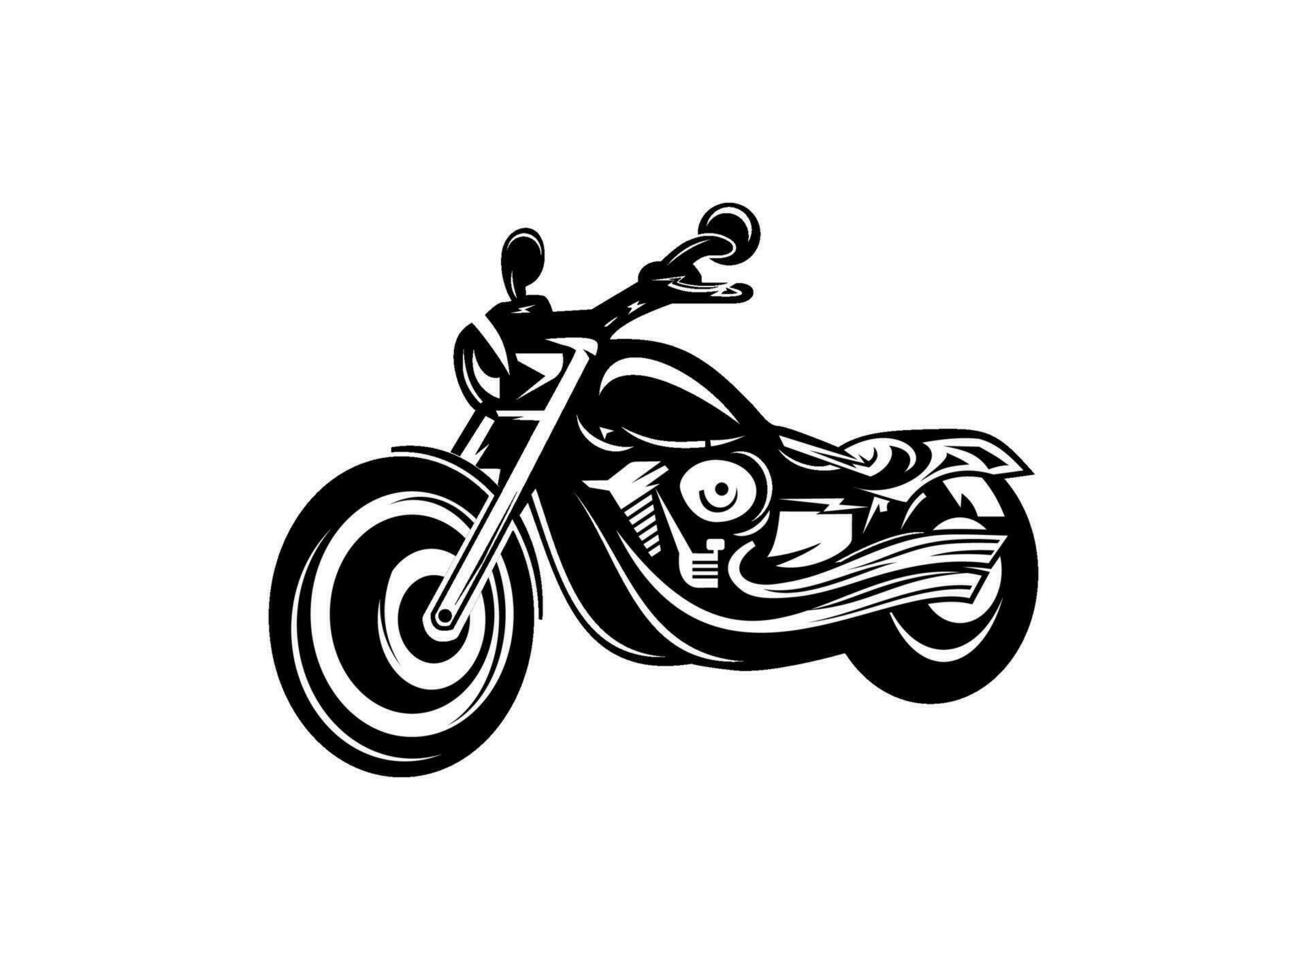 Motorcycle Vintage with Wing logo concept in black and white colors isolated vector illustration